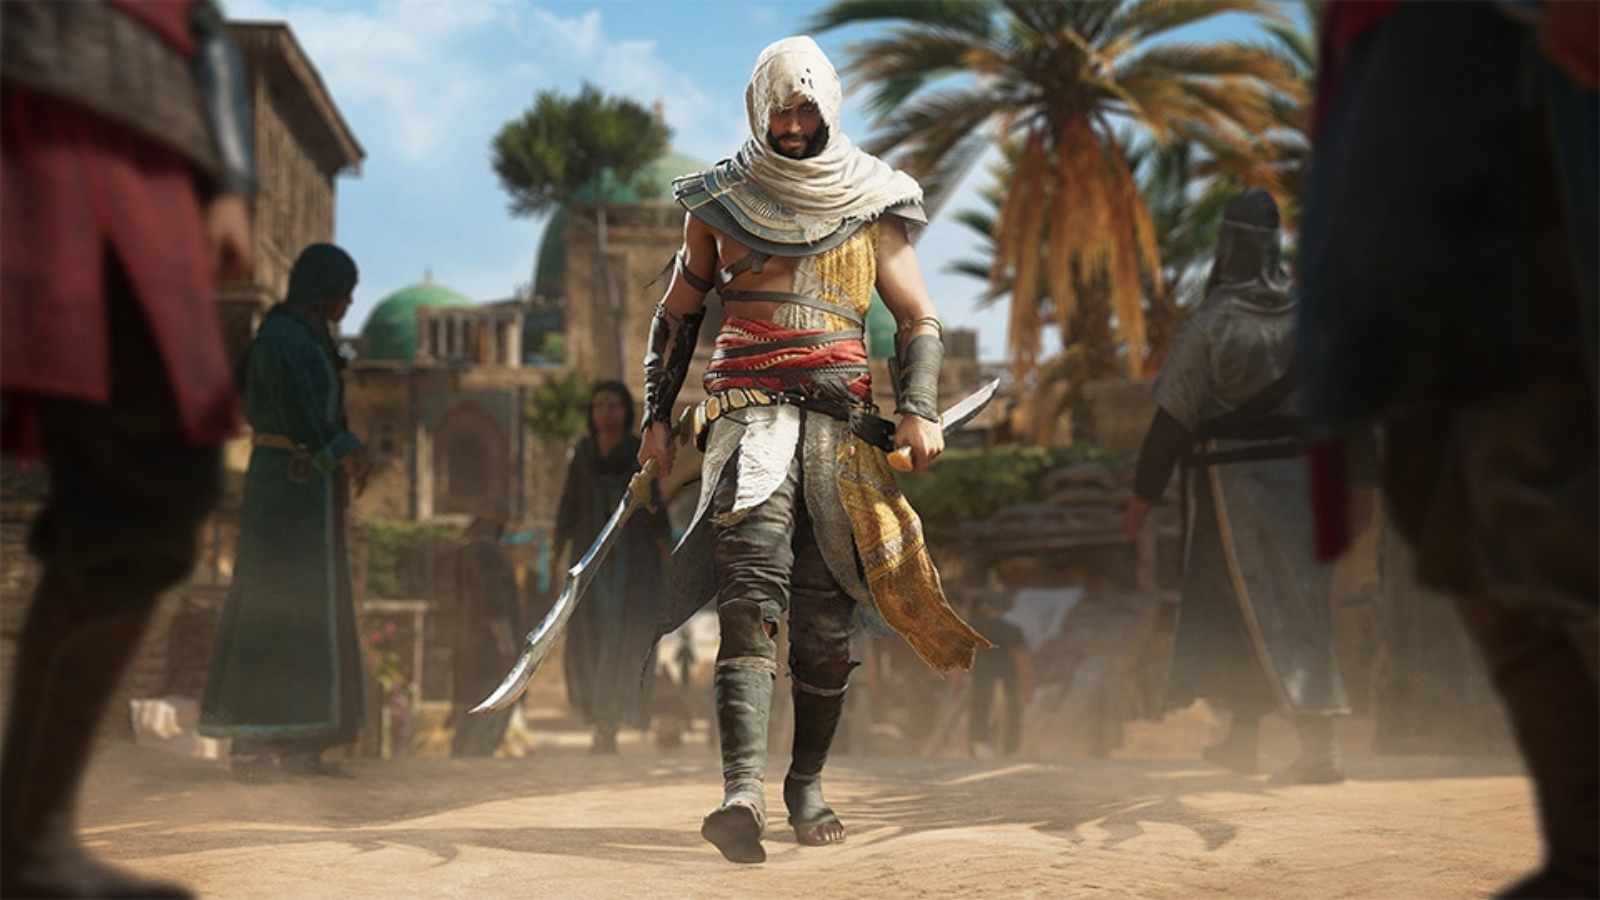 Assassin's Creed Red is bringing back the series' best feature